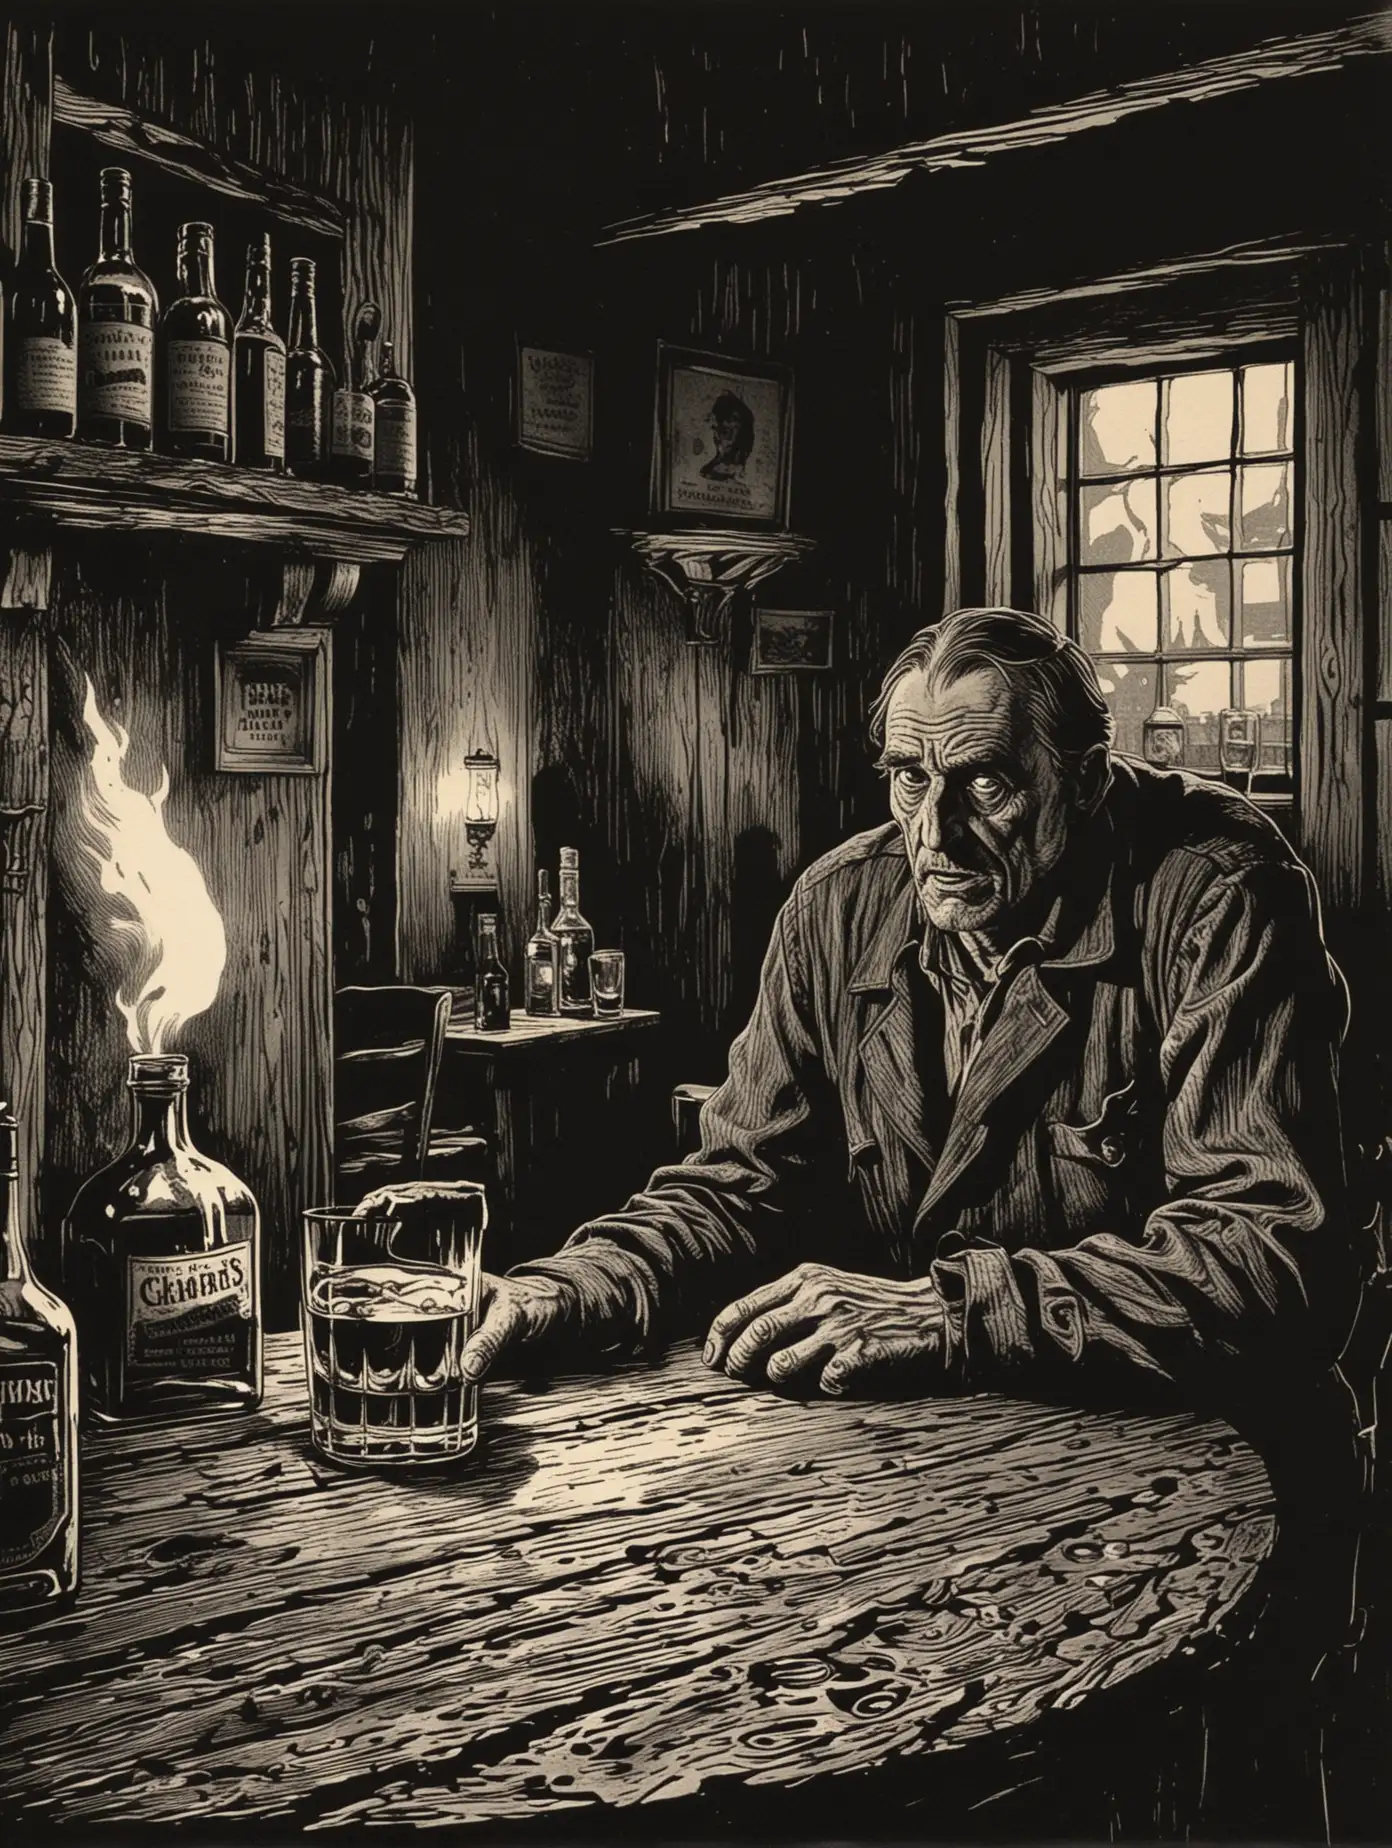 woodcut Illustration from the 1930s, Scary, dark atmosphere. An man tells a story over a whiskey in a dark pub.